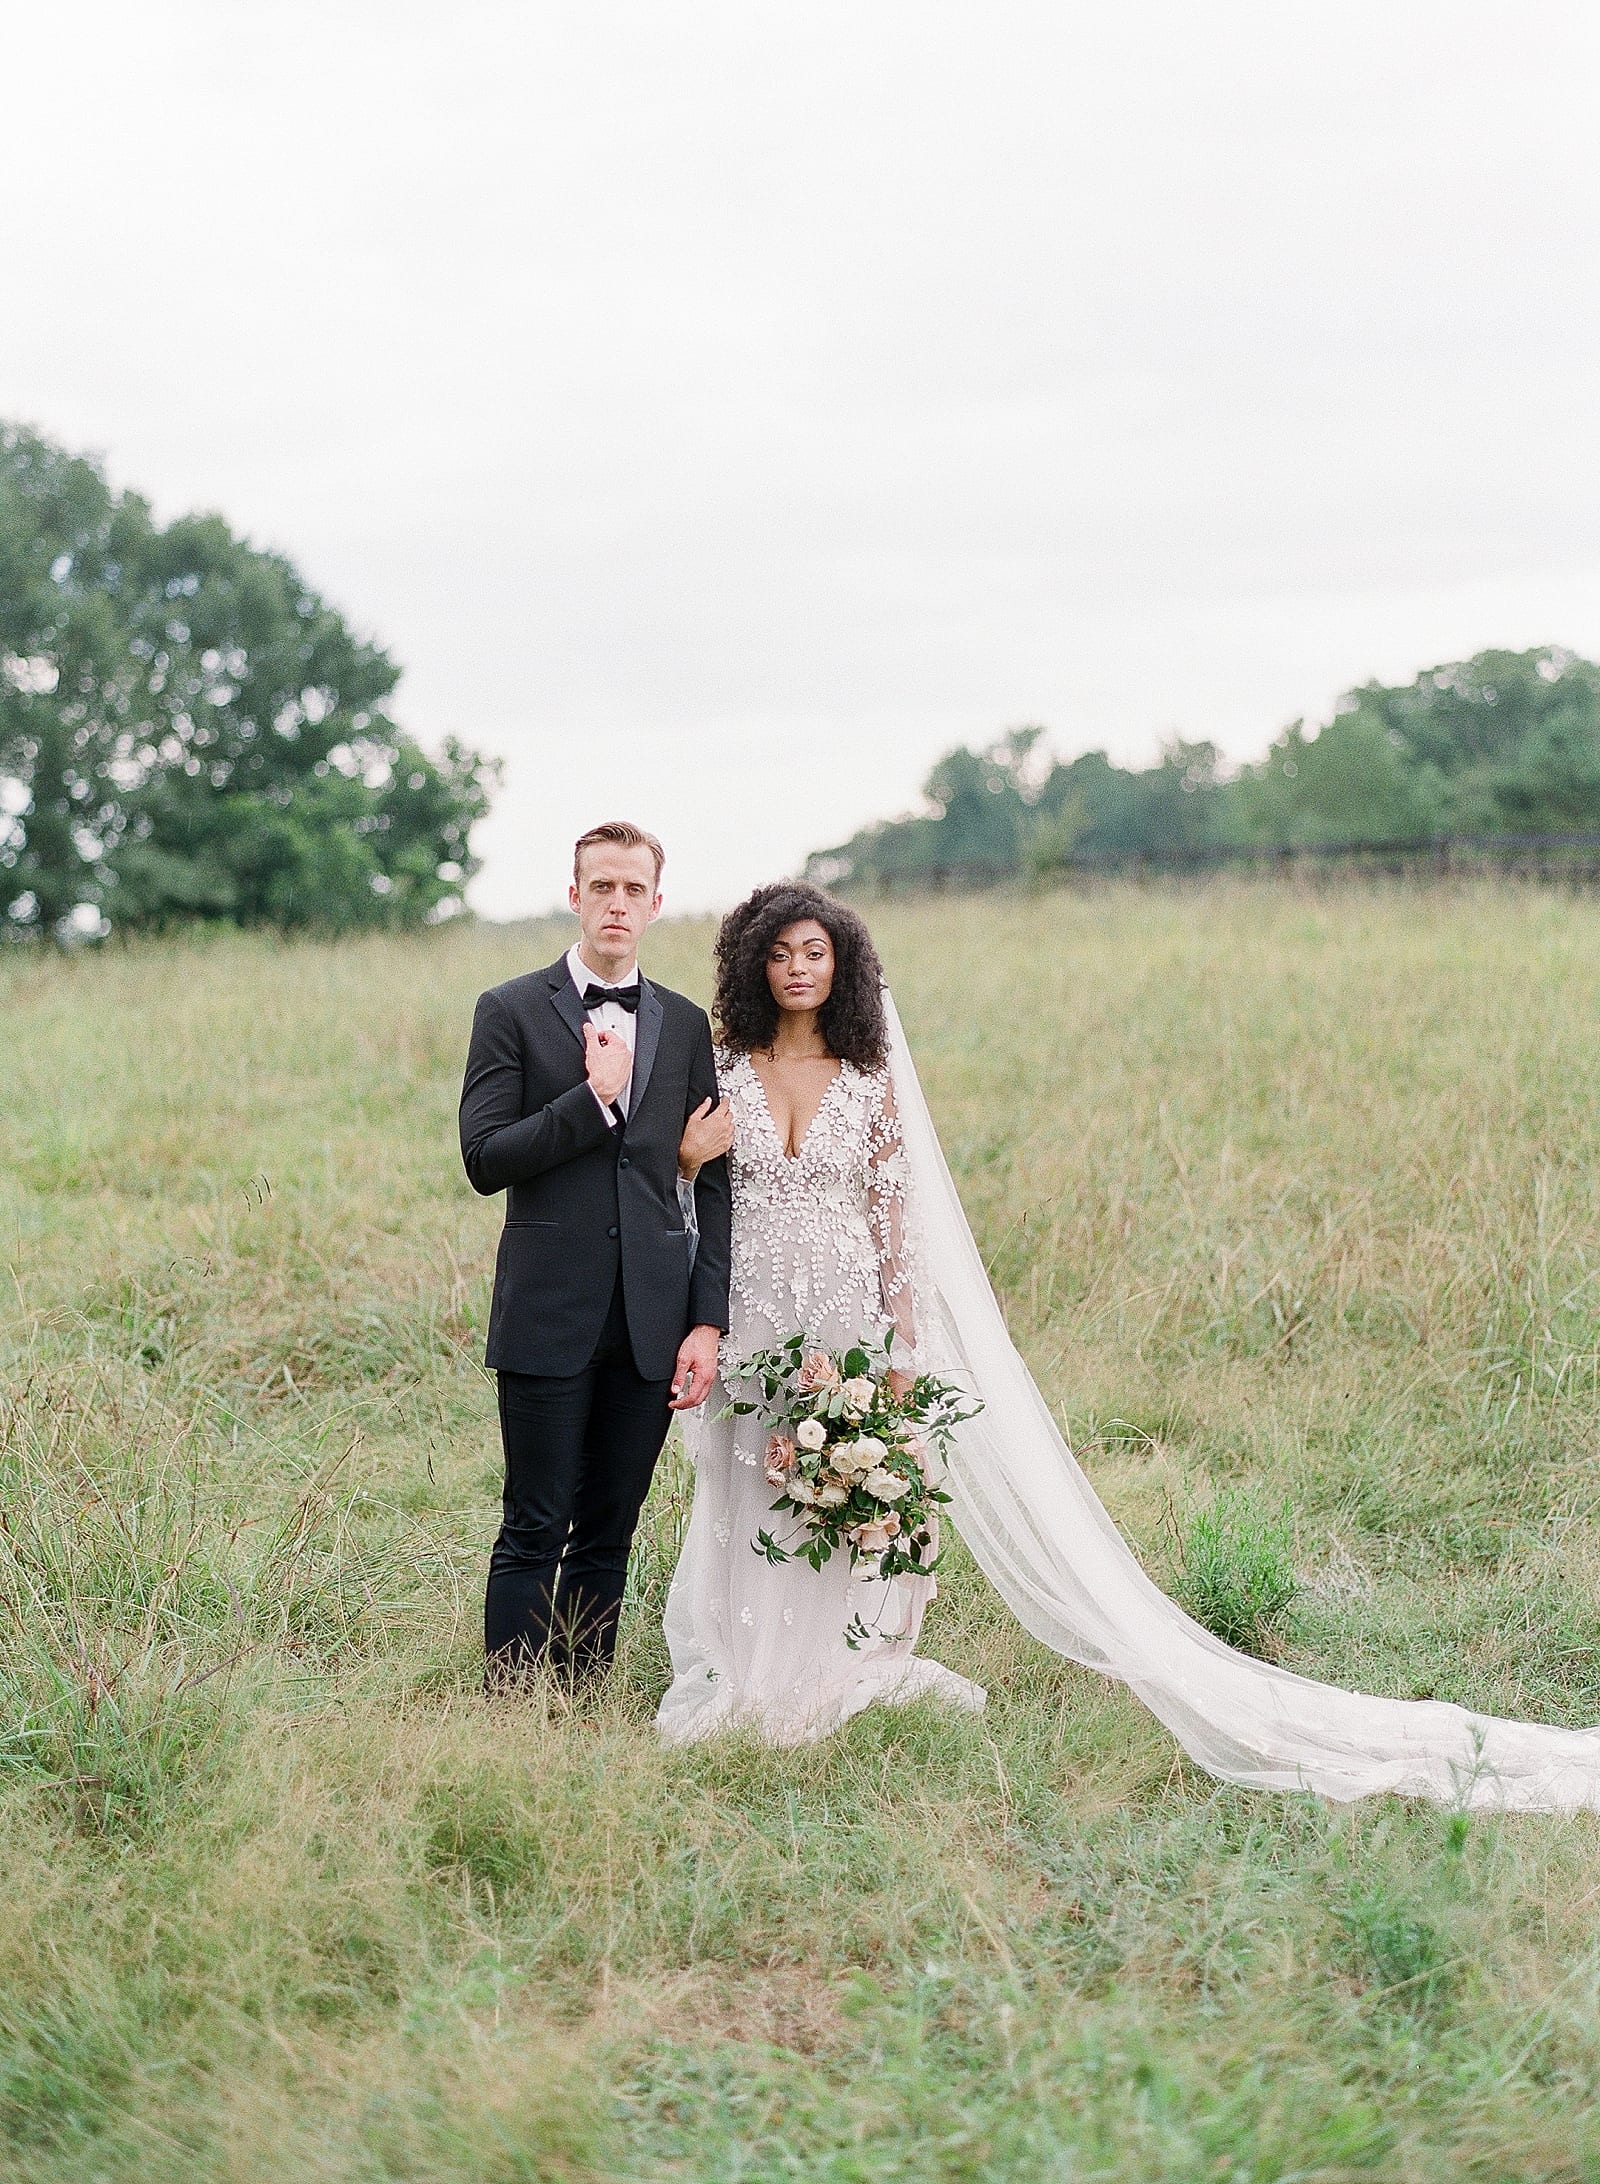 Bride and Groom Linking Arms In Field Looking at Camera Photo